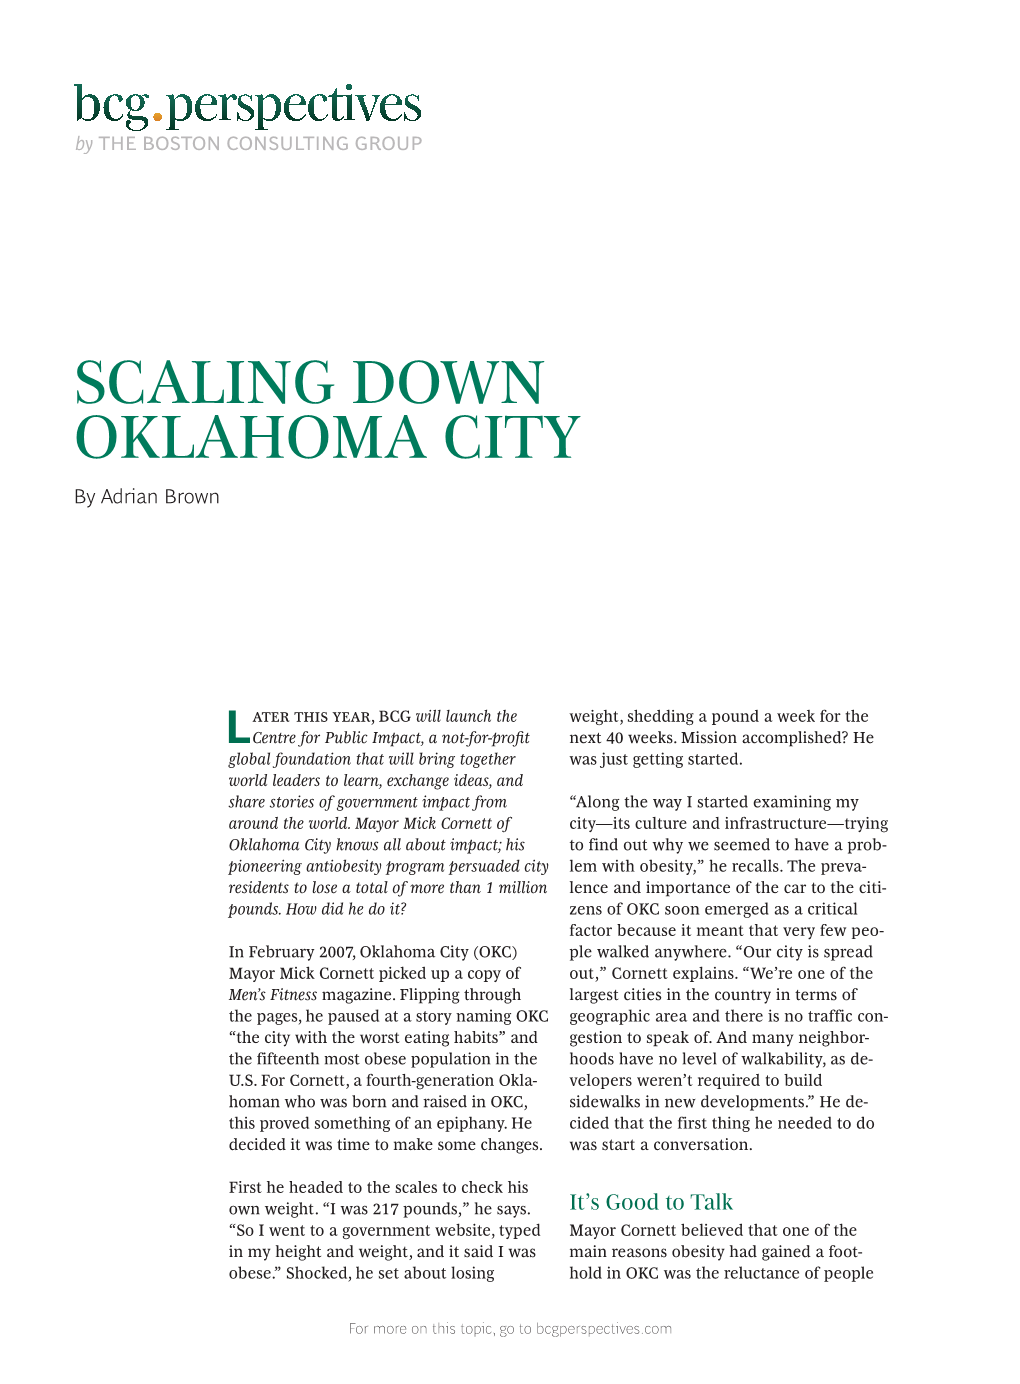 SCALING DOWN OKLAHOMA CITY by Adrian Brown